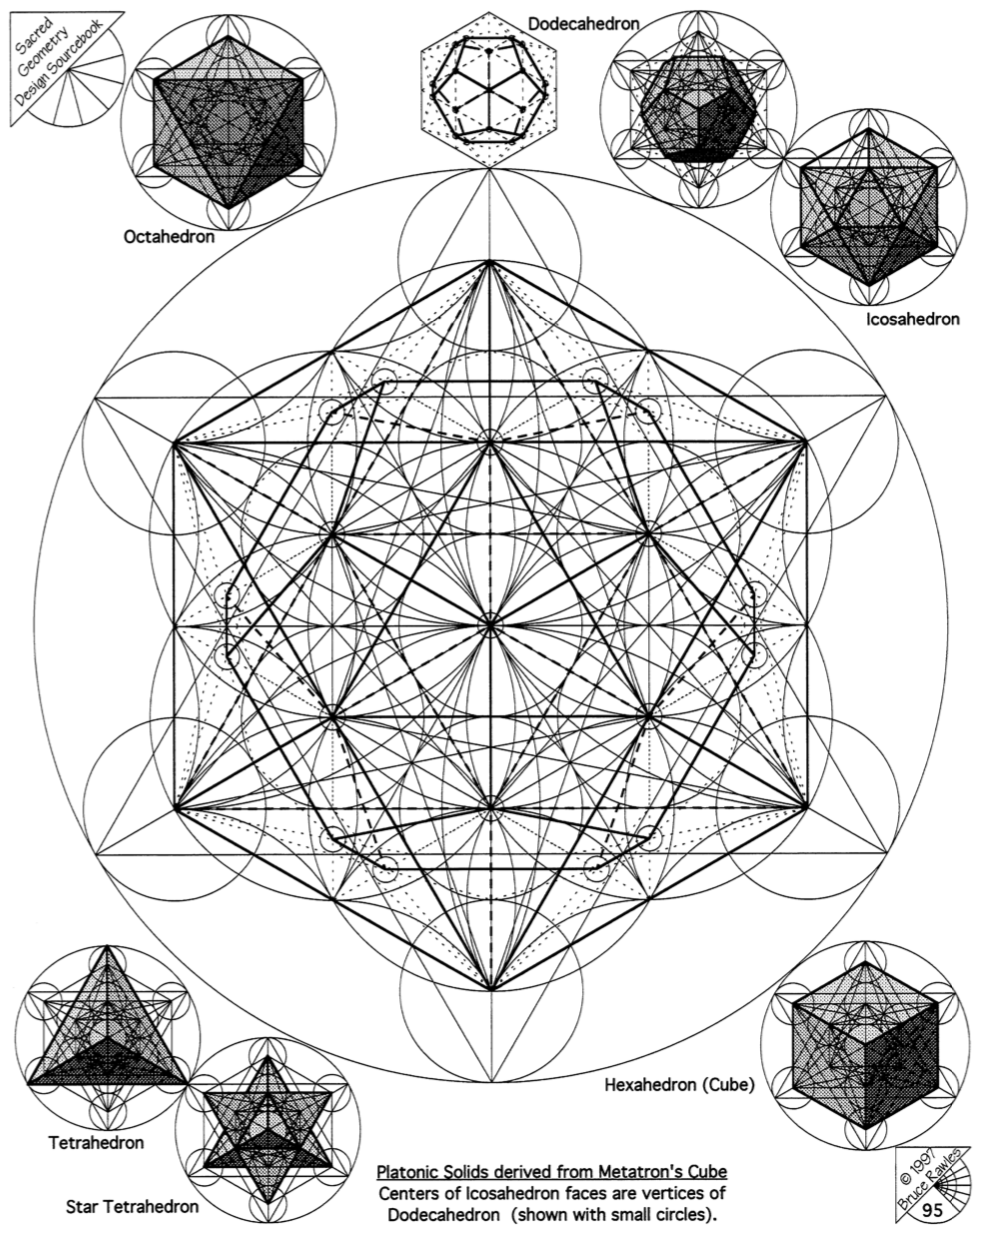 Platonic Solid vertices from Metatron's Cube